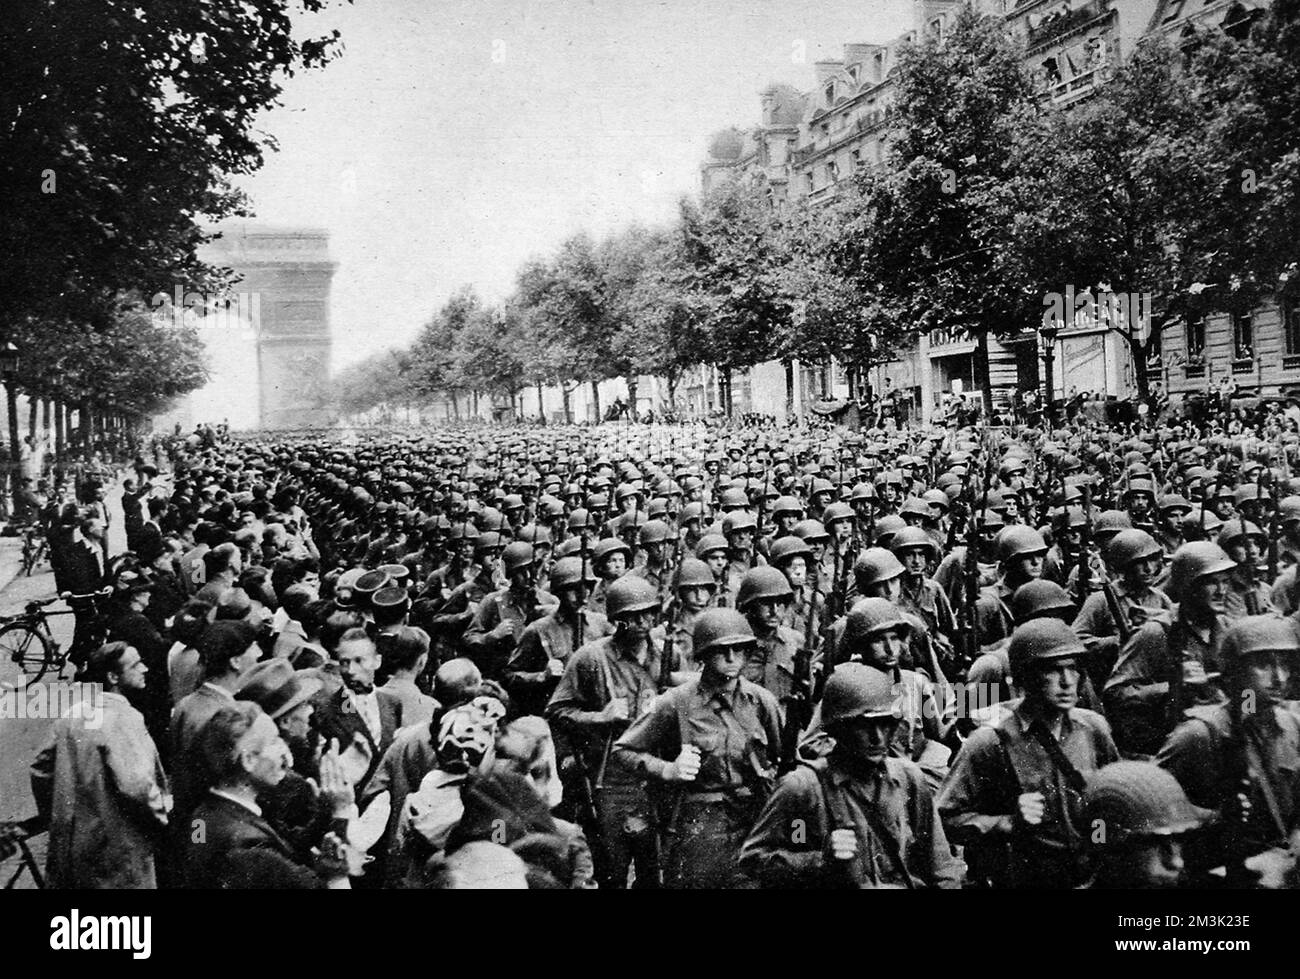 Troops of the US Fourth Division marching along the Champs Elysees, Paris, 1944.   This was not a victory parade, but rather a show of strength to reassure French citizens of the capital and to dissuade any further German action in the city.  1944 Stock Photo